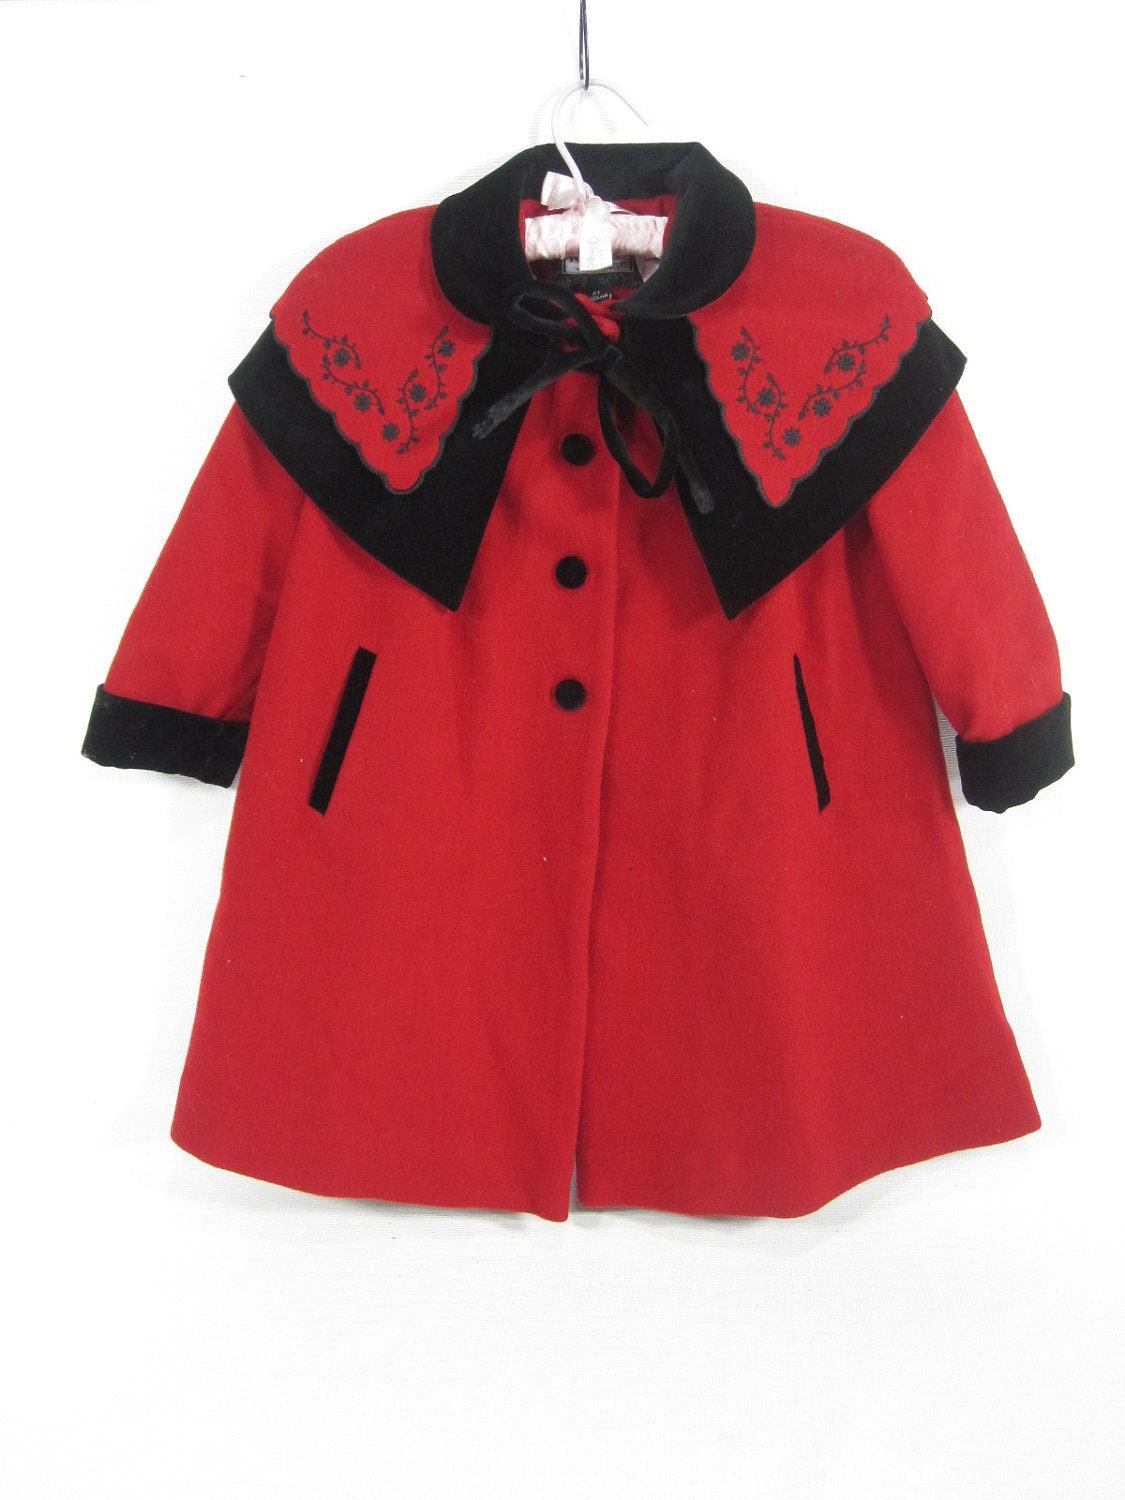 Vintage Red and Black Child's Coat